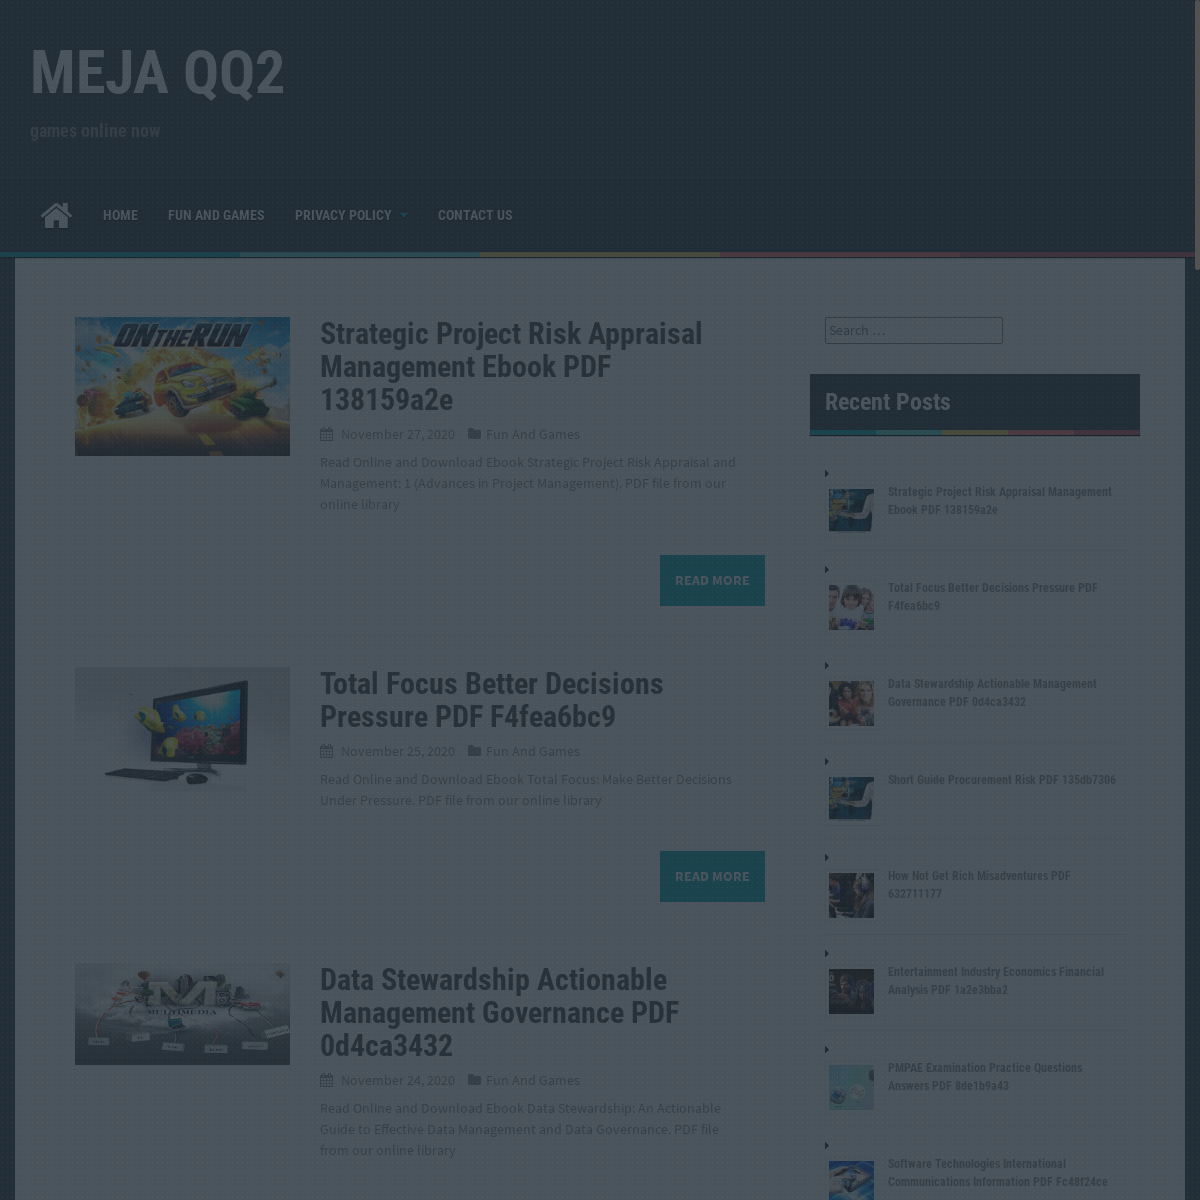 A complete backup of mejaqq2.site